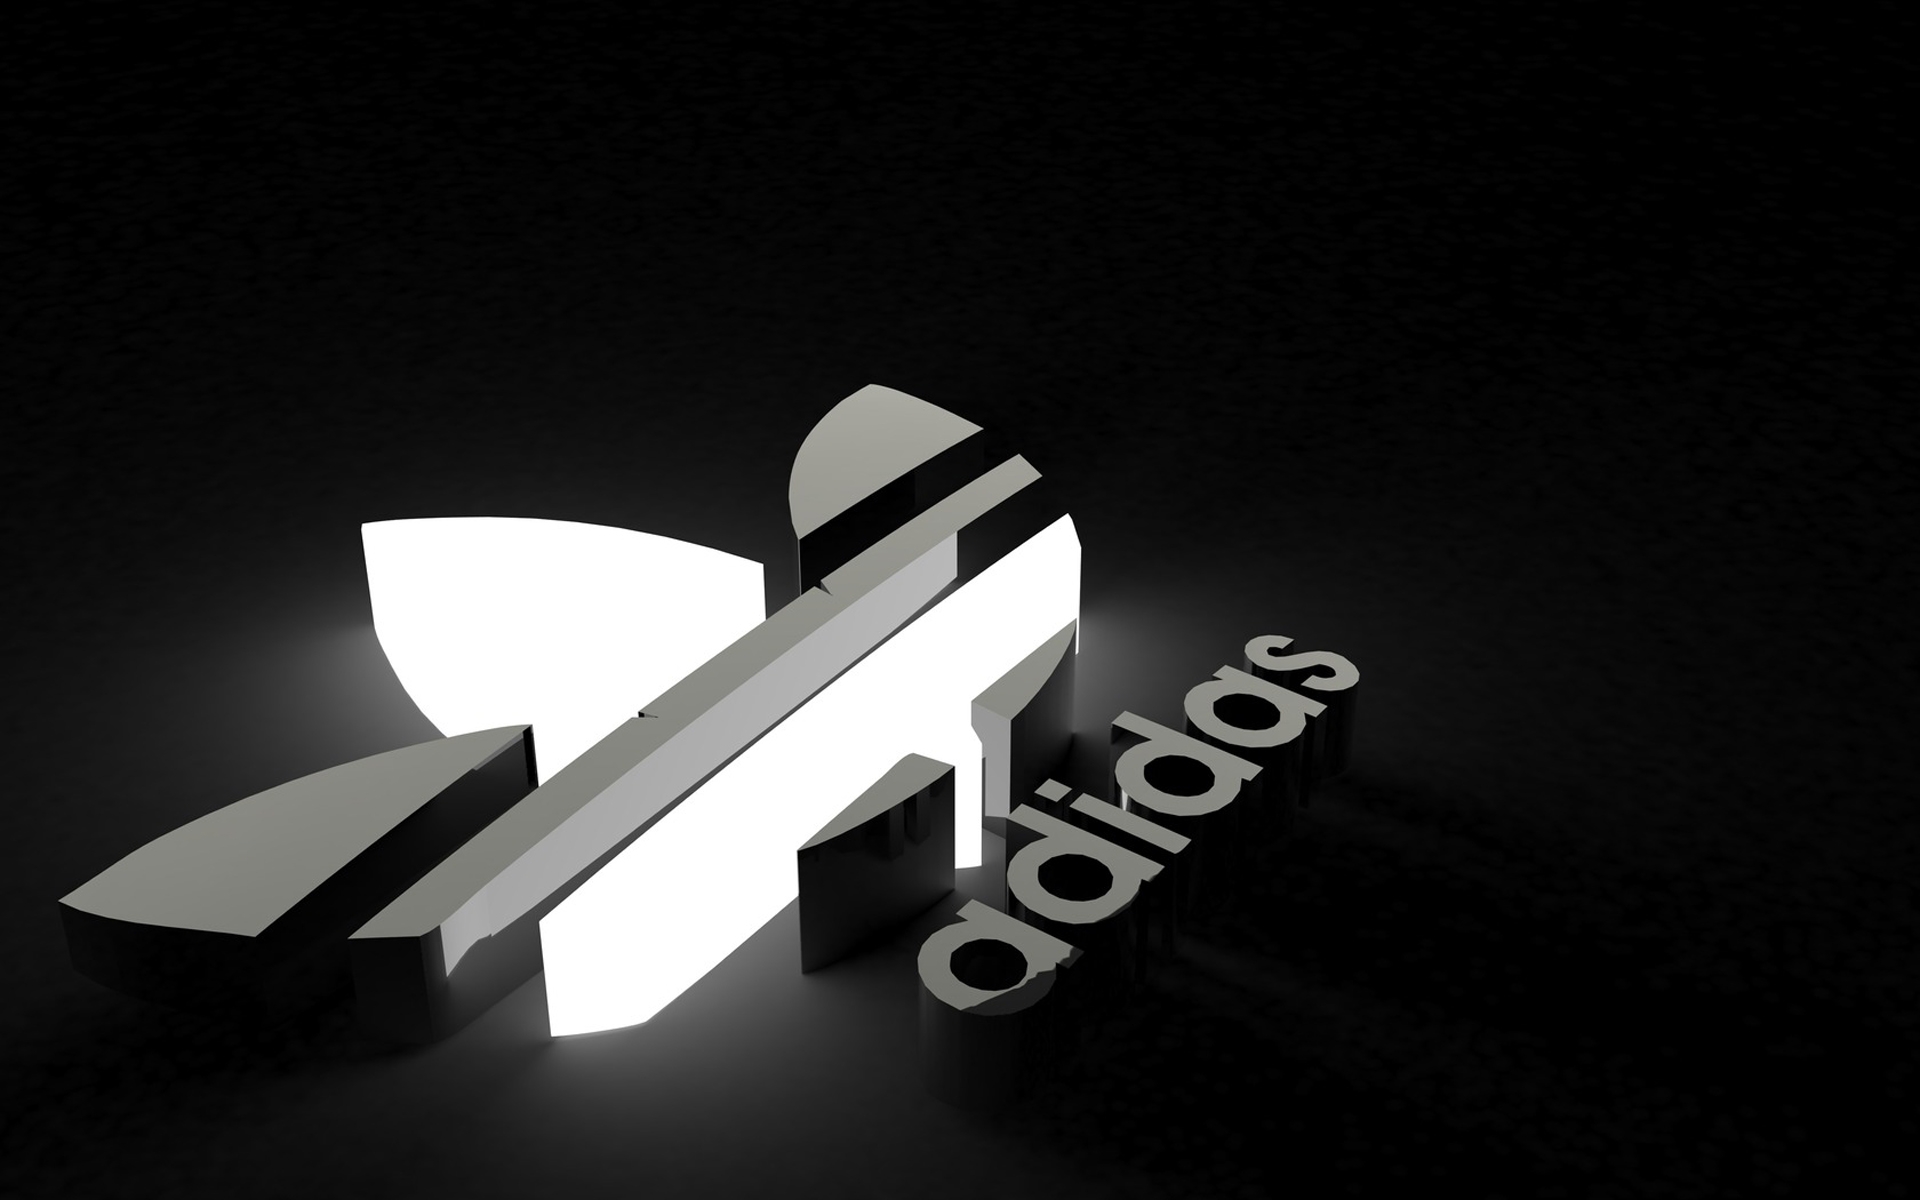 July By Stephen Ments Off On New HD Adidas Logo Wallpaper